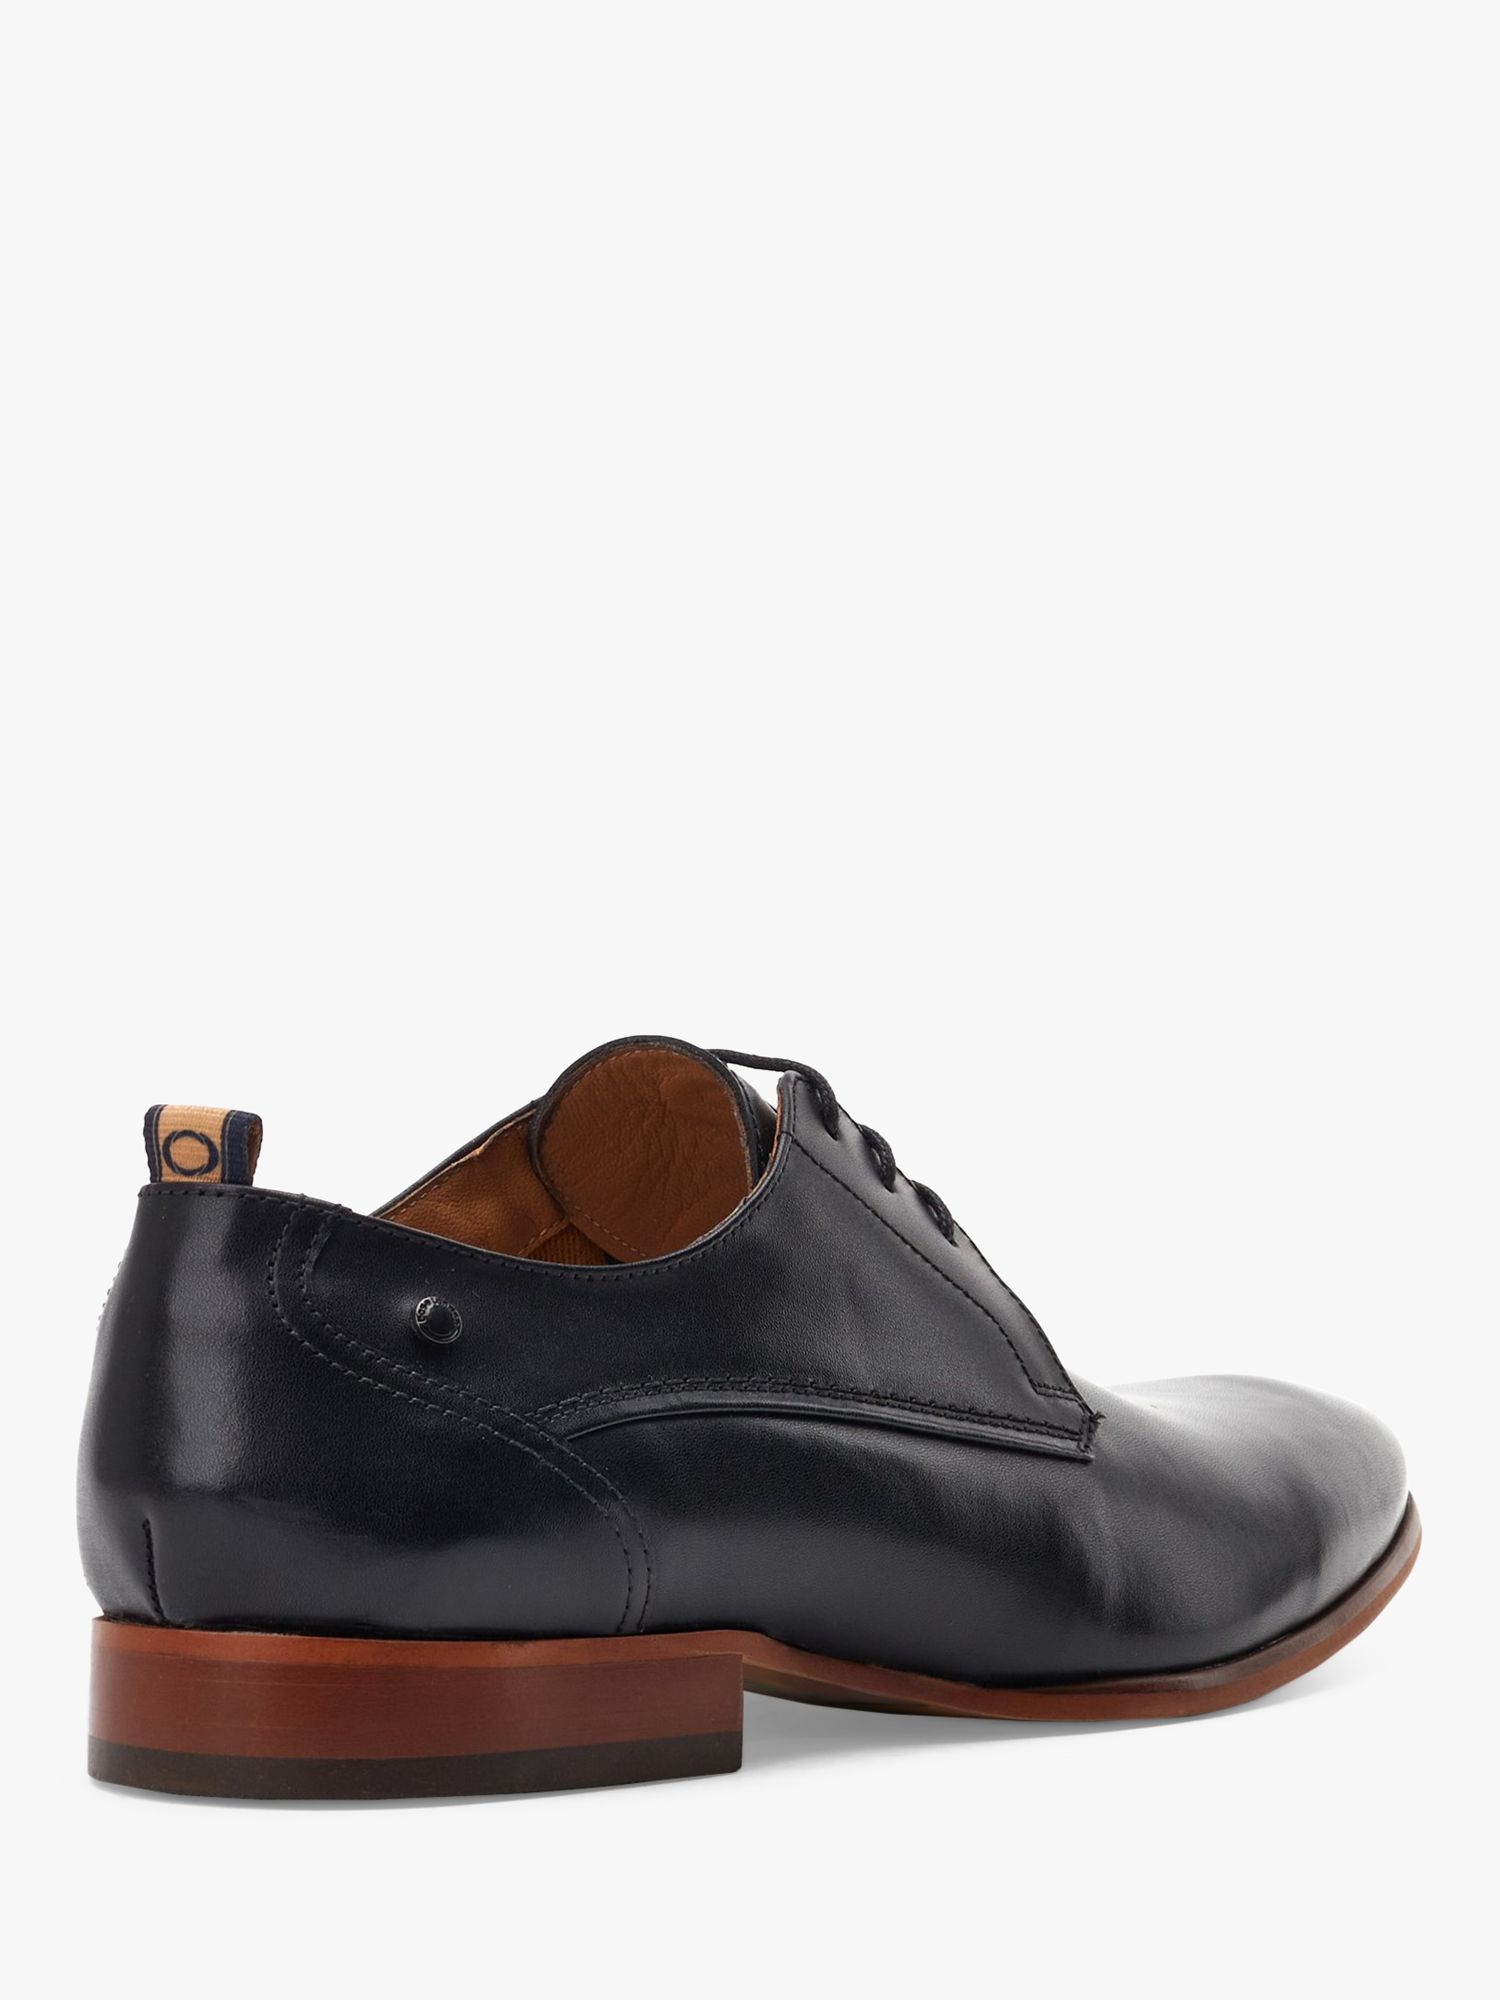 Buy Base London Gambino Lace Up Leather Derby Shoes, Black Online at johnlewis.com